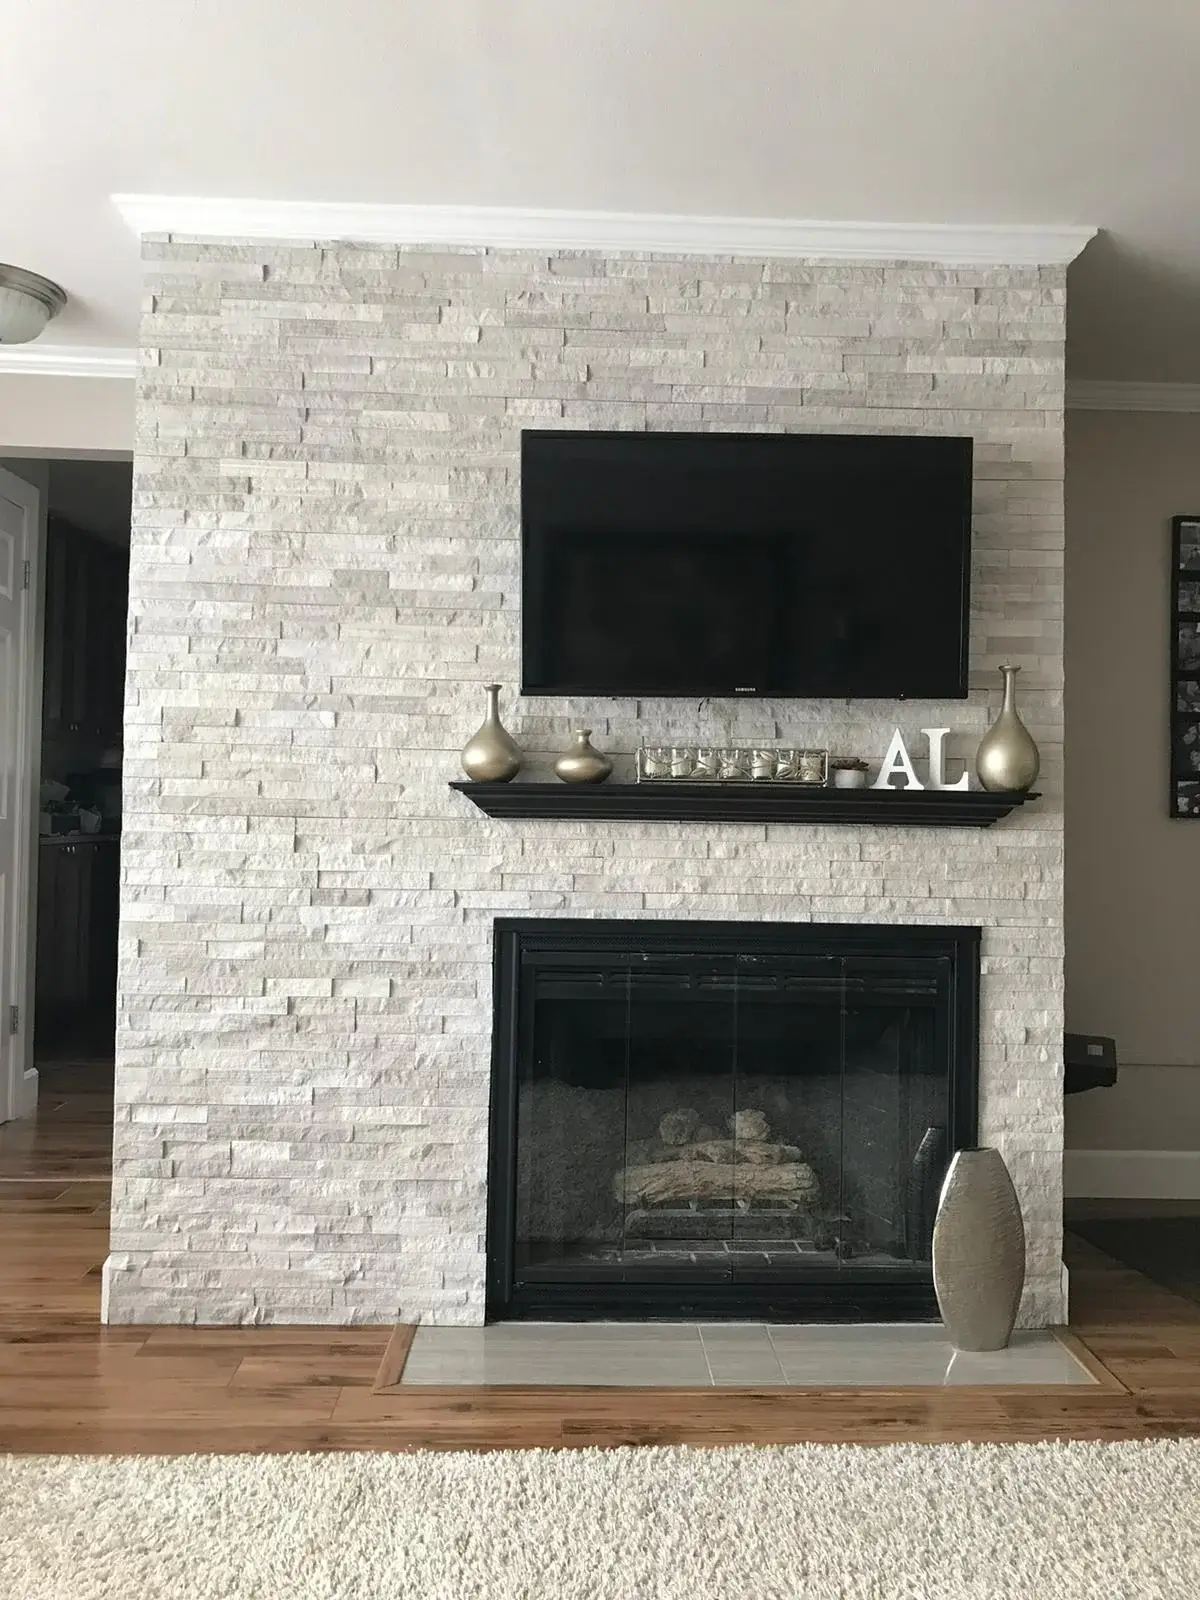 Image where you can see a textured fireplace installed by Leo's flooring